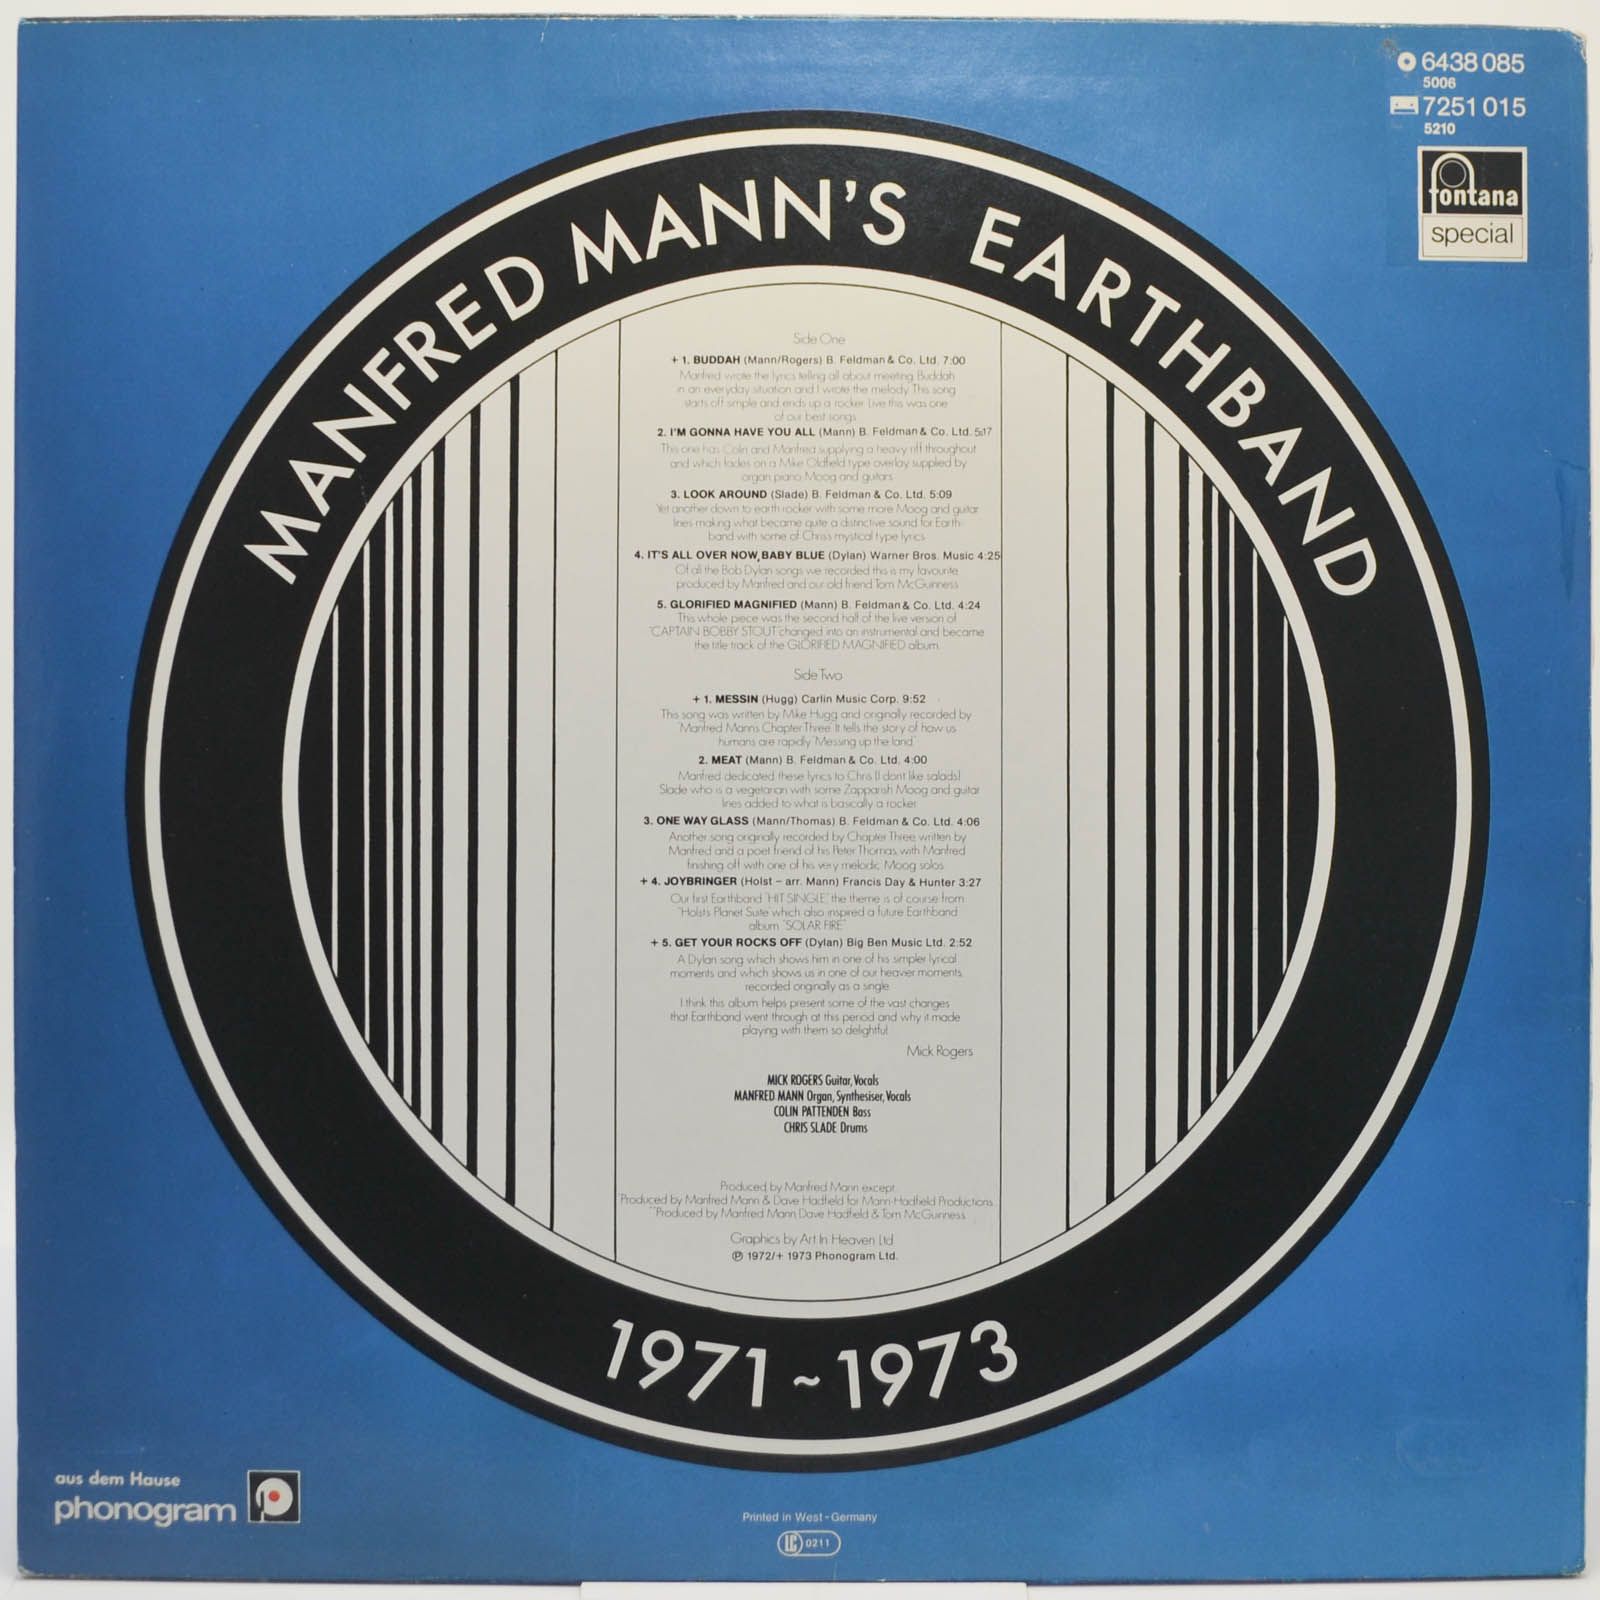 Manfred Mann's Earth Band — 1971 - 1973, 1977